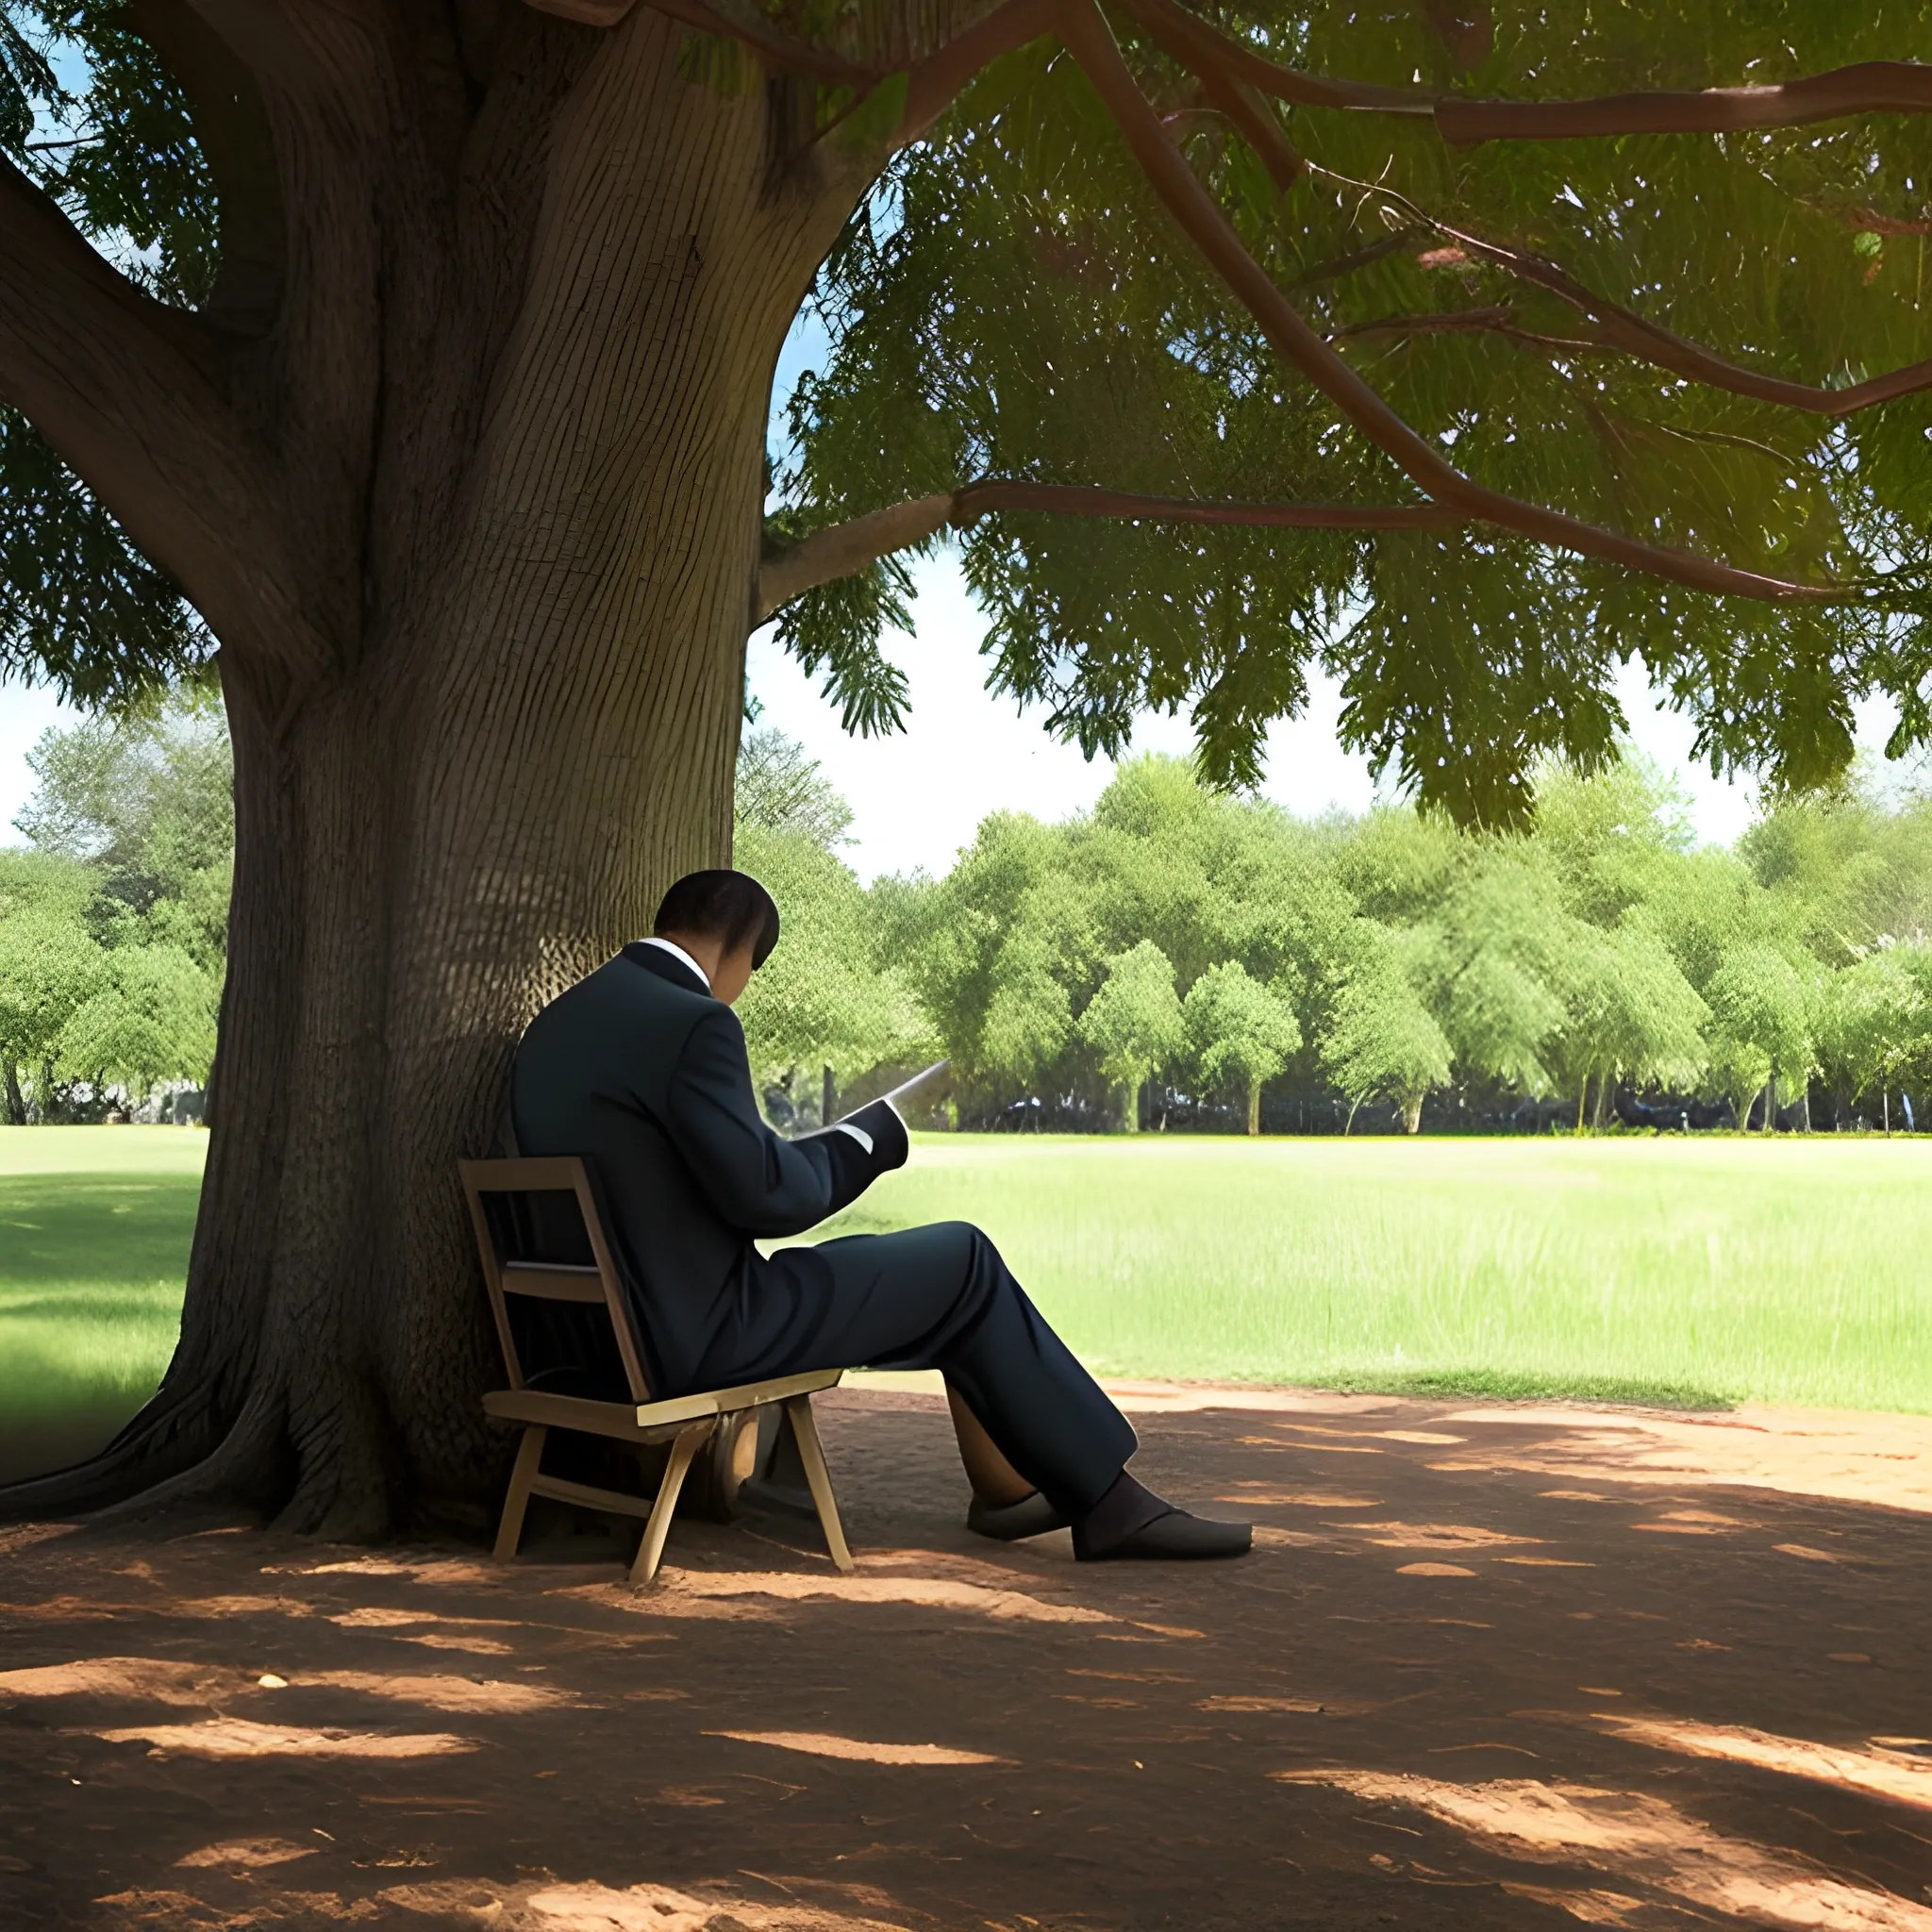 a man writing under the tree

